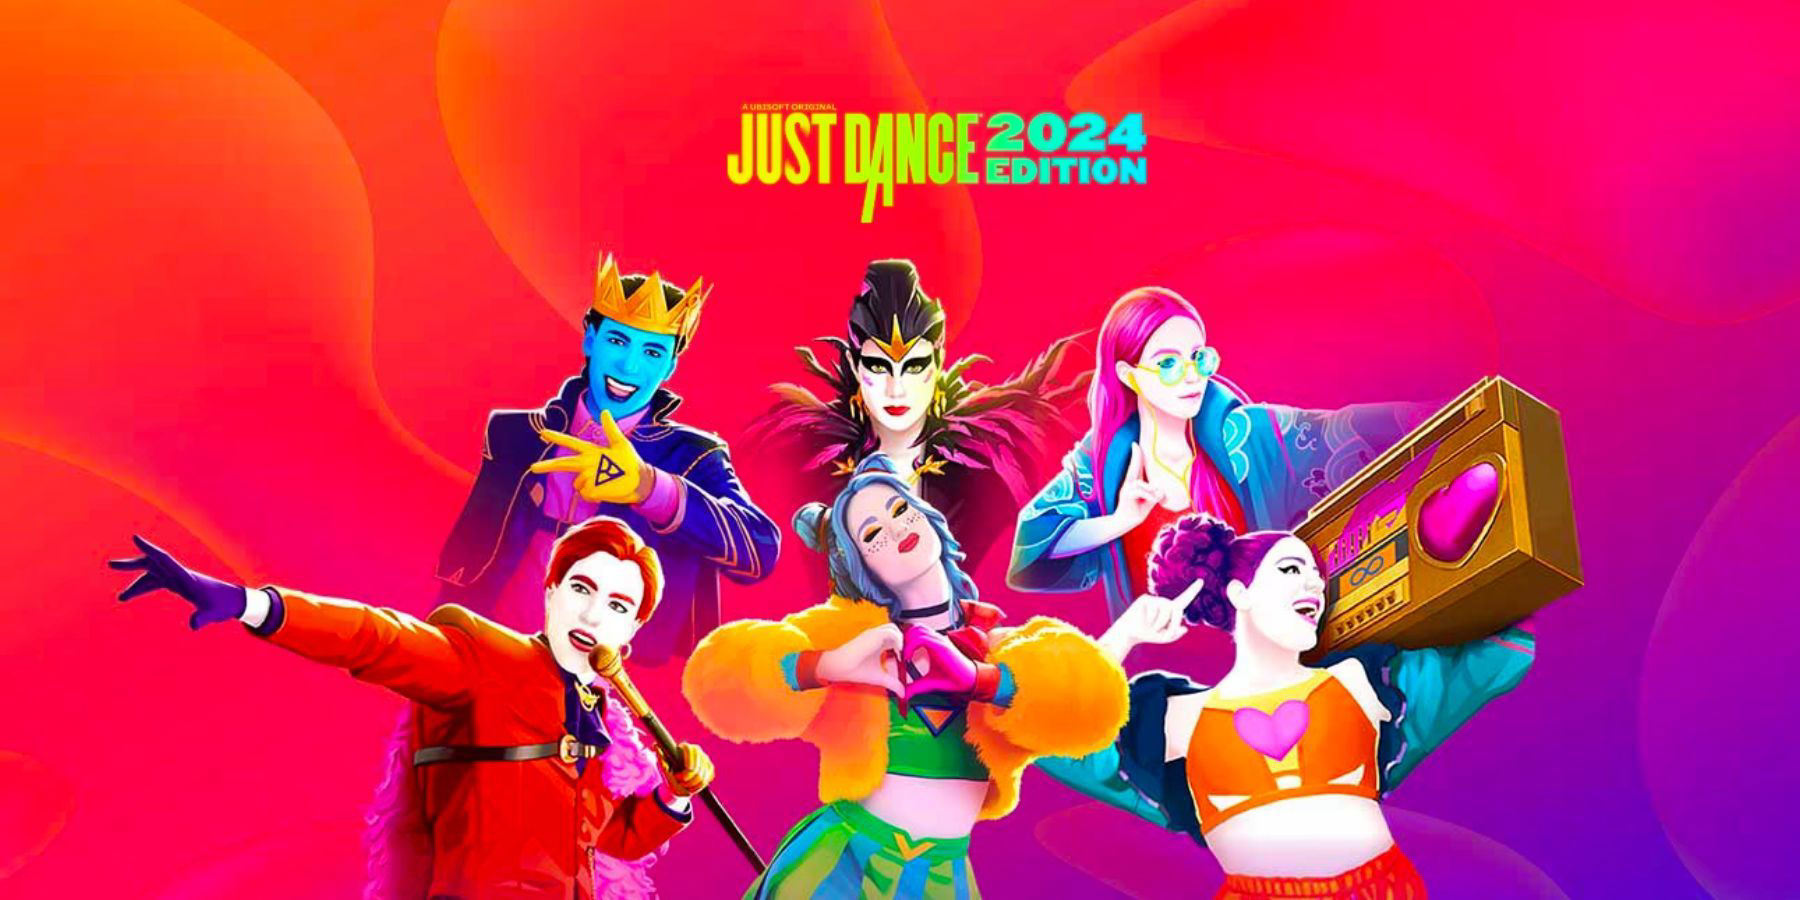 All Songs Confirmed for Just Dance 2024 So Far